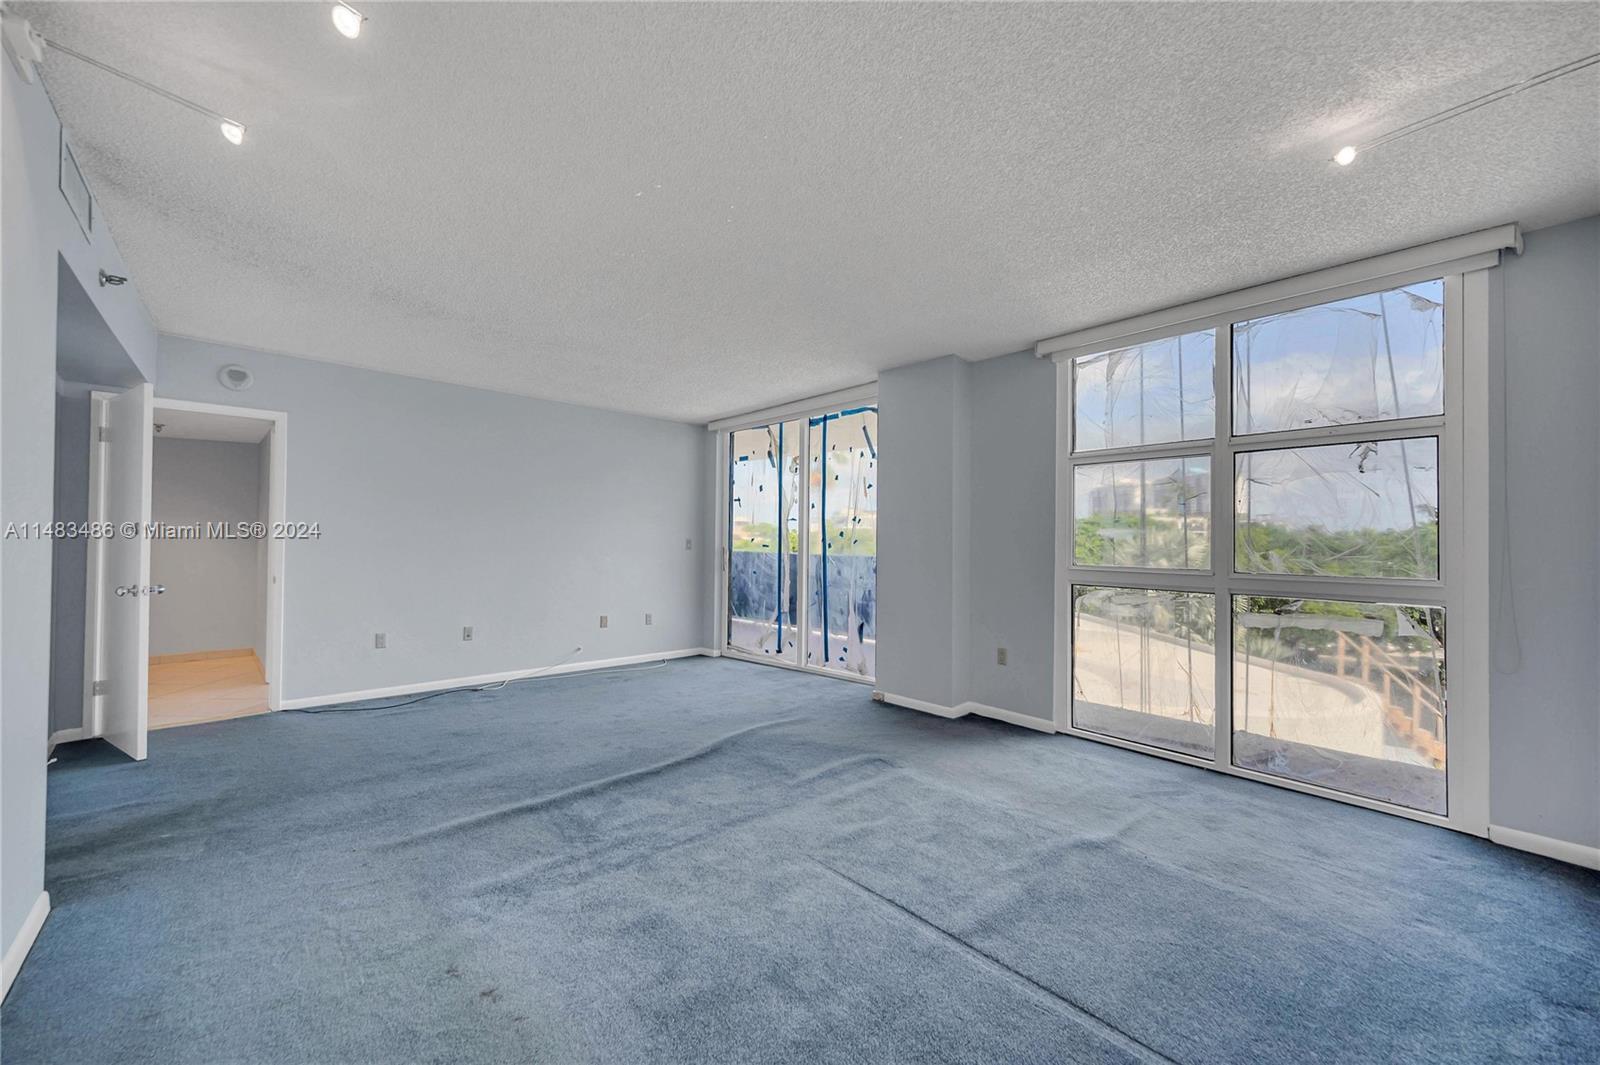 9 Island Ave Unit 414, Miami Beach, Florida, 33139, United States, 3 Bedrooms Bedrooms, ,3 BathroomsBathrooms,Residential,For Sale,9 Island Ave Unit 414,1397621